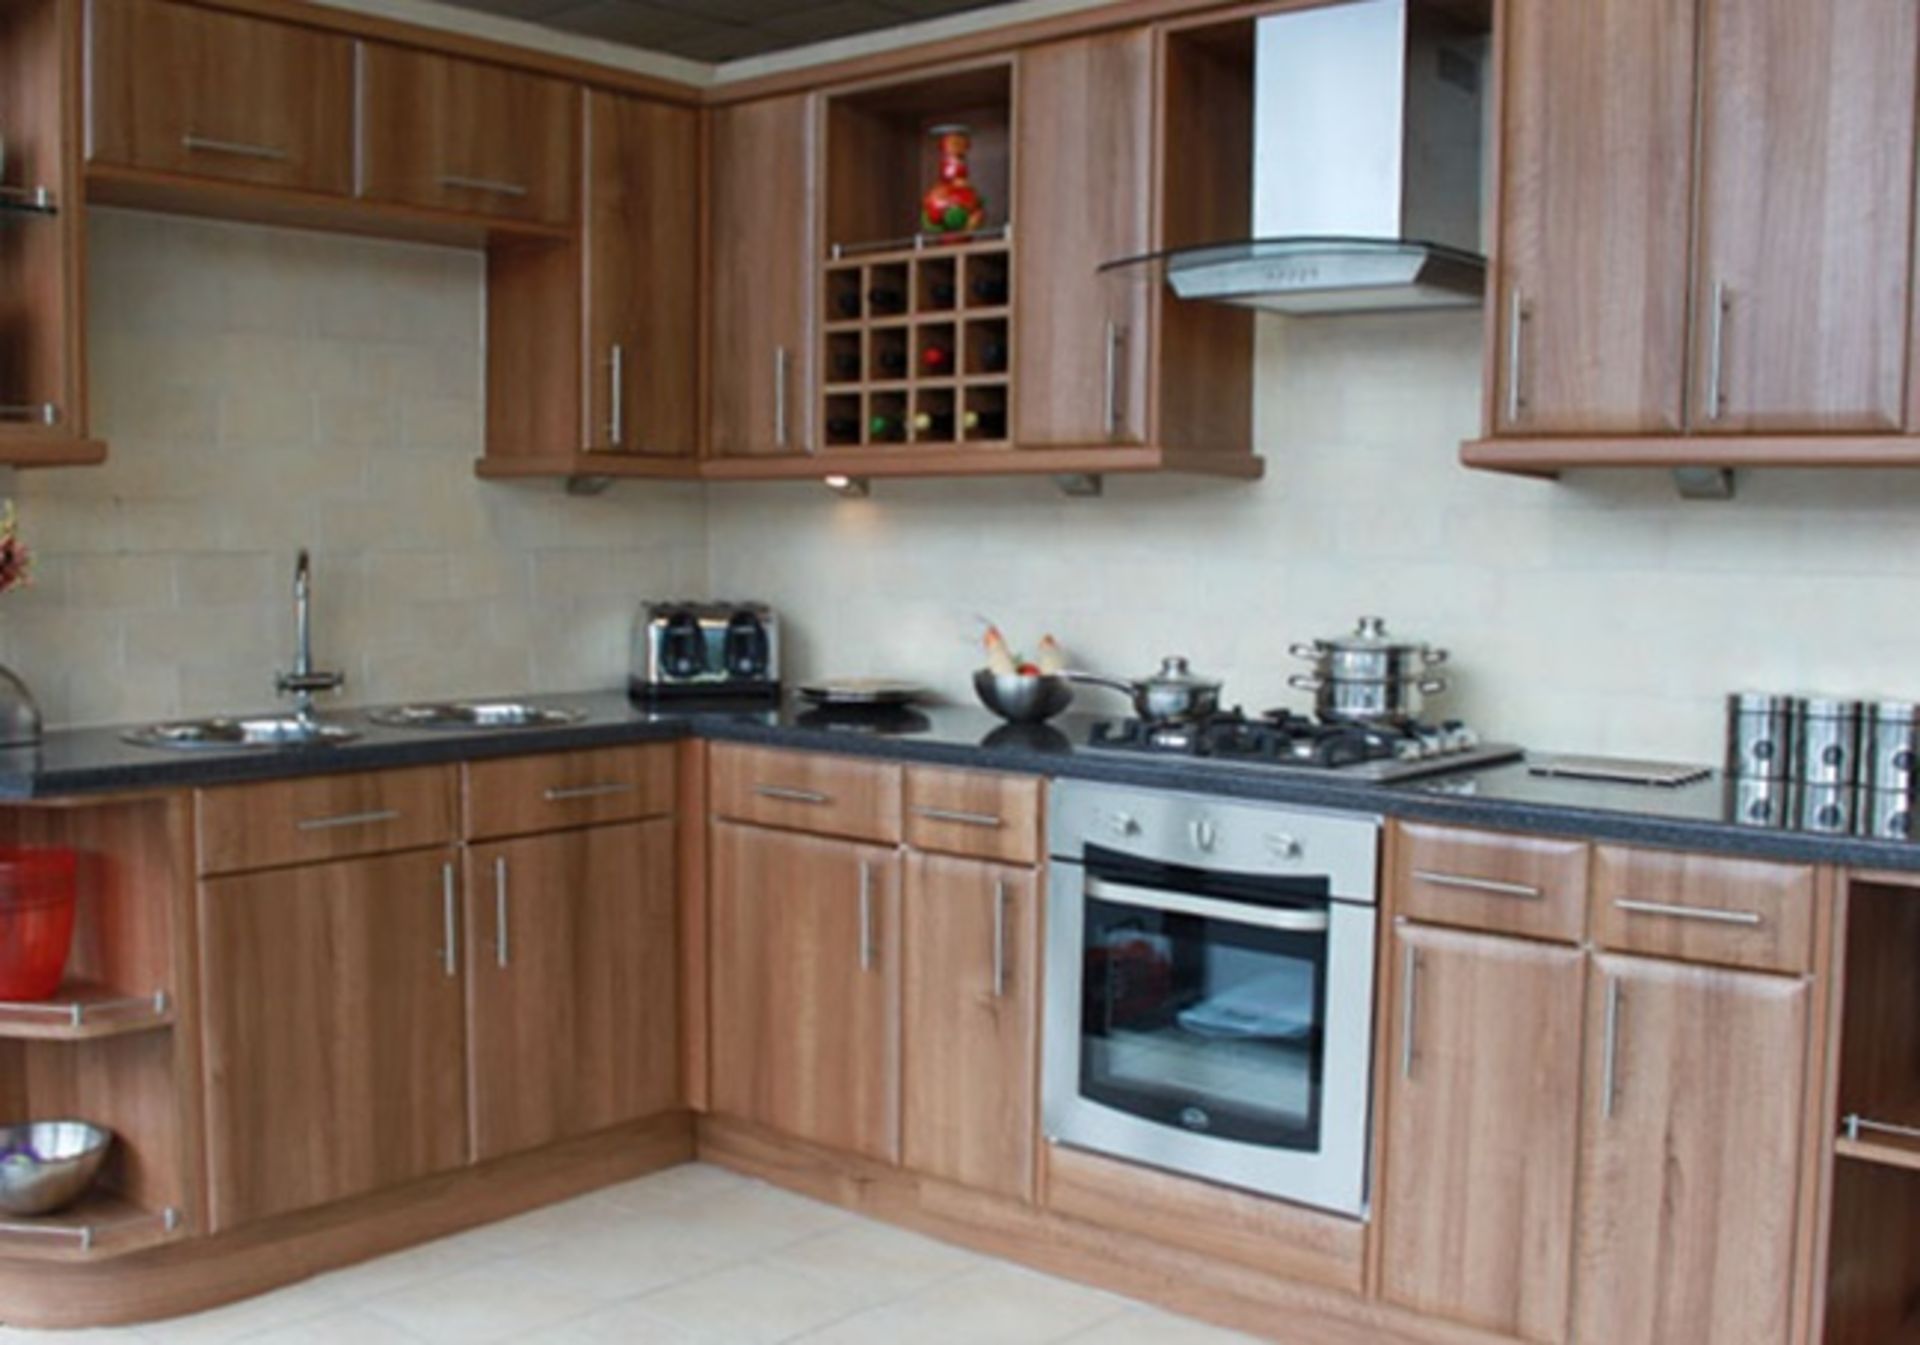 Resale Opportunity - Brand New Kitchen Stock in Walnut - CL160 - Lot comprises of approx 1,200 - Image 4 of 4